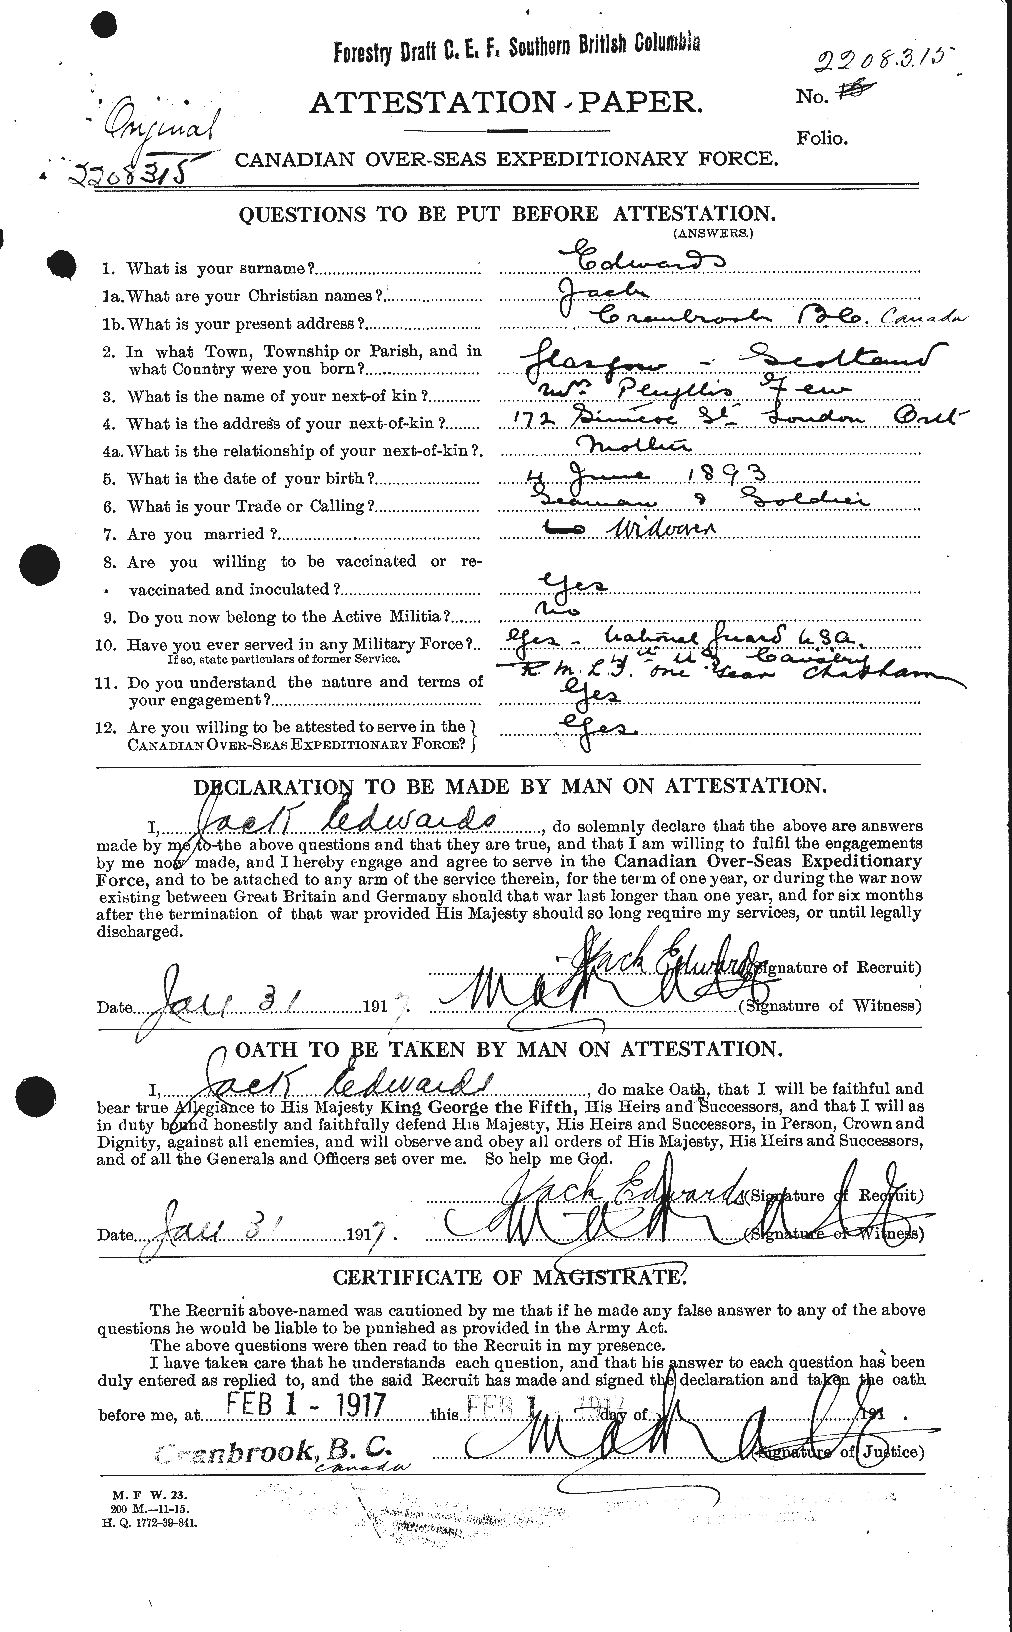 Personnel Records of the First World War - CEF 309799a